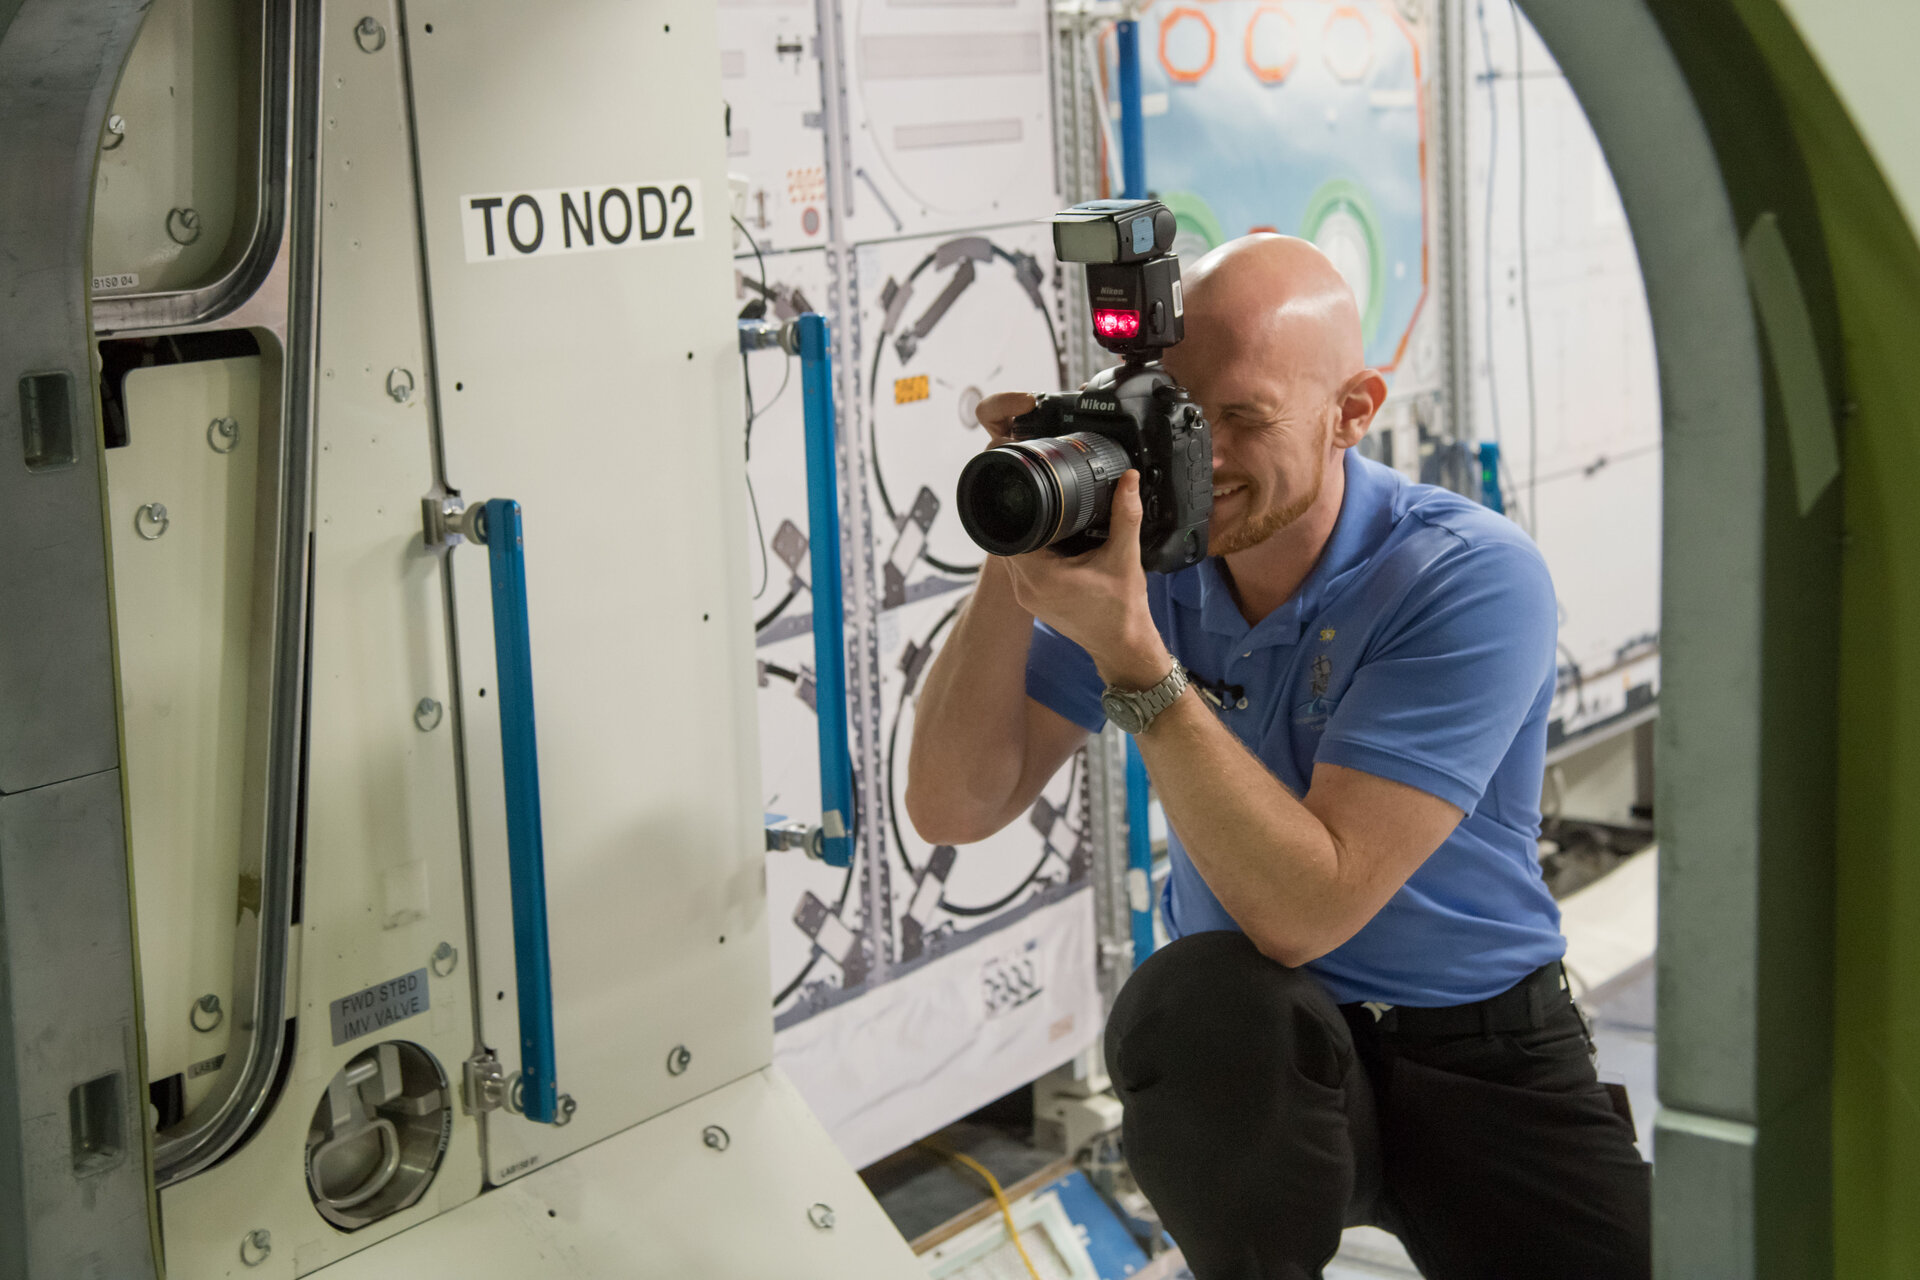 Expedition 56/57 crew members training